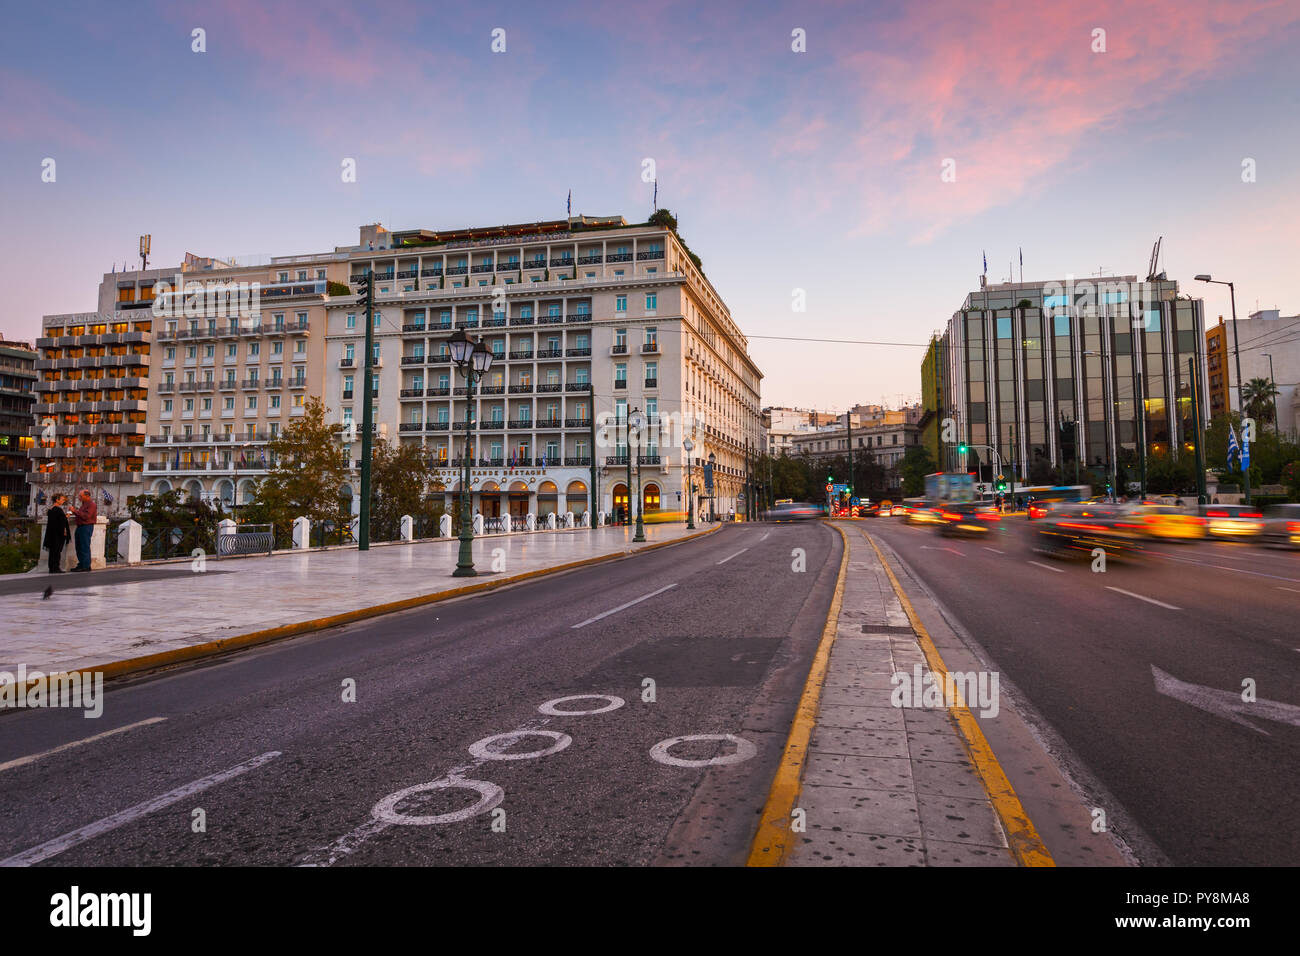 Athens, Greece - October 24, 2018: Traffic in Syntagma square in central Athens. Stock Photo